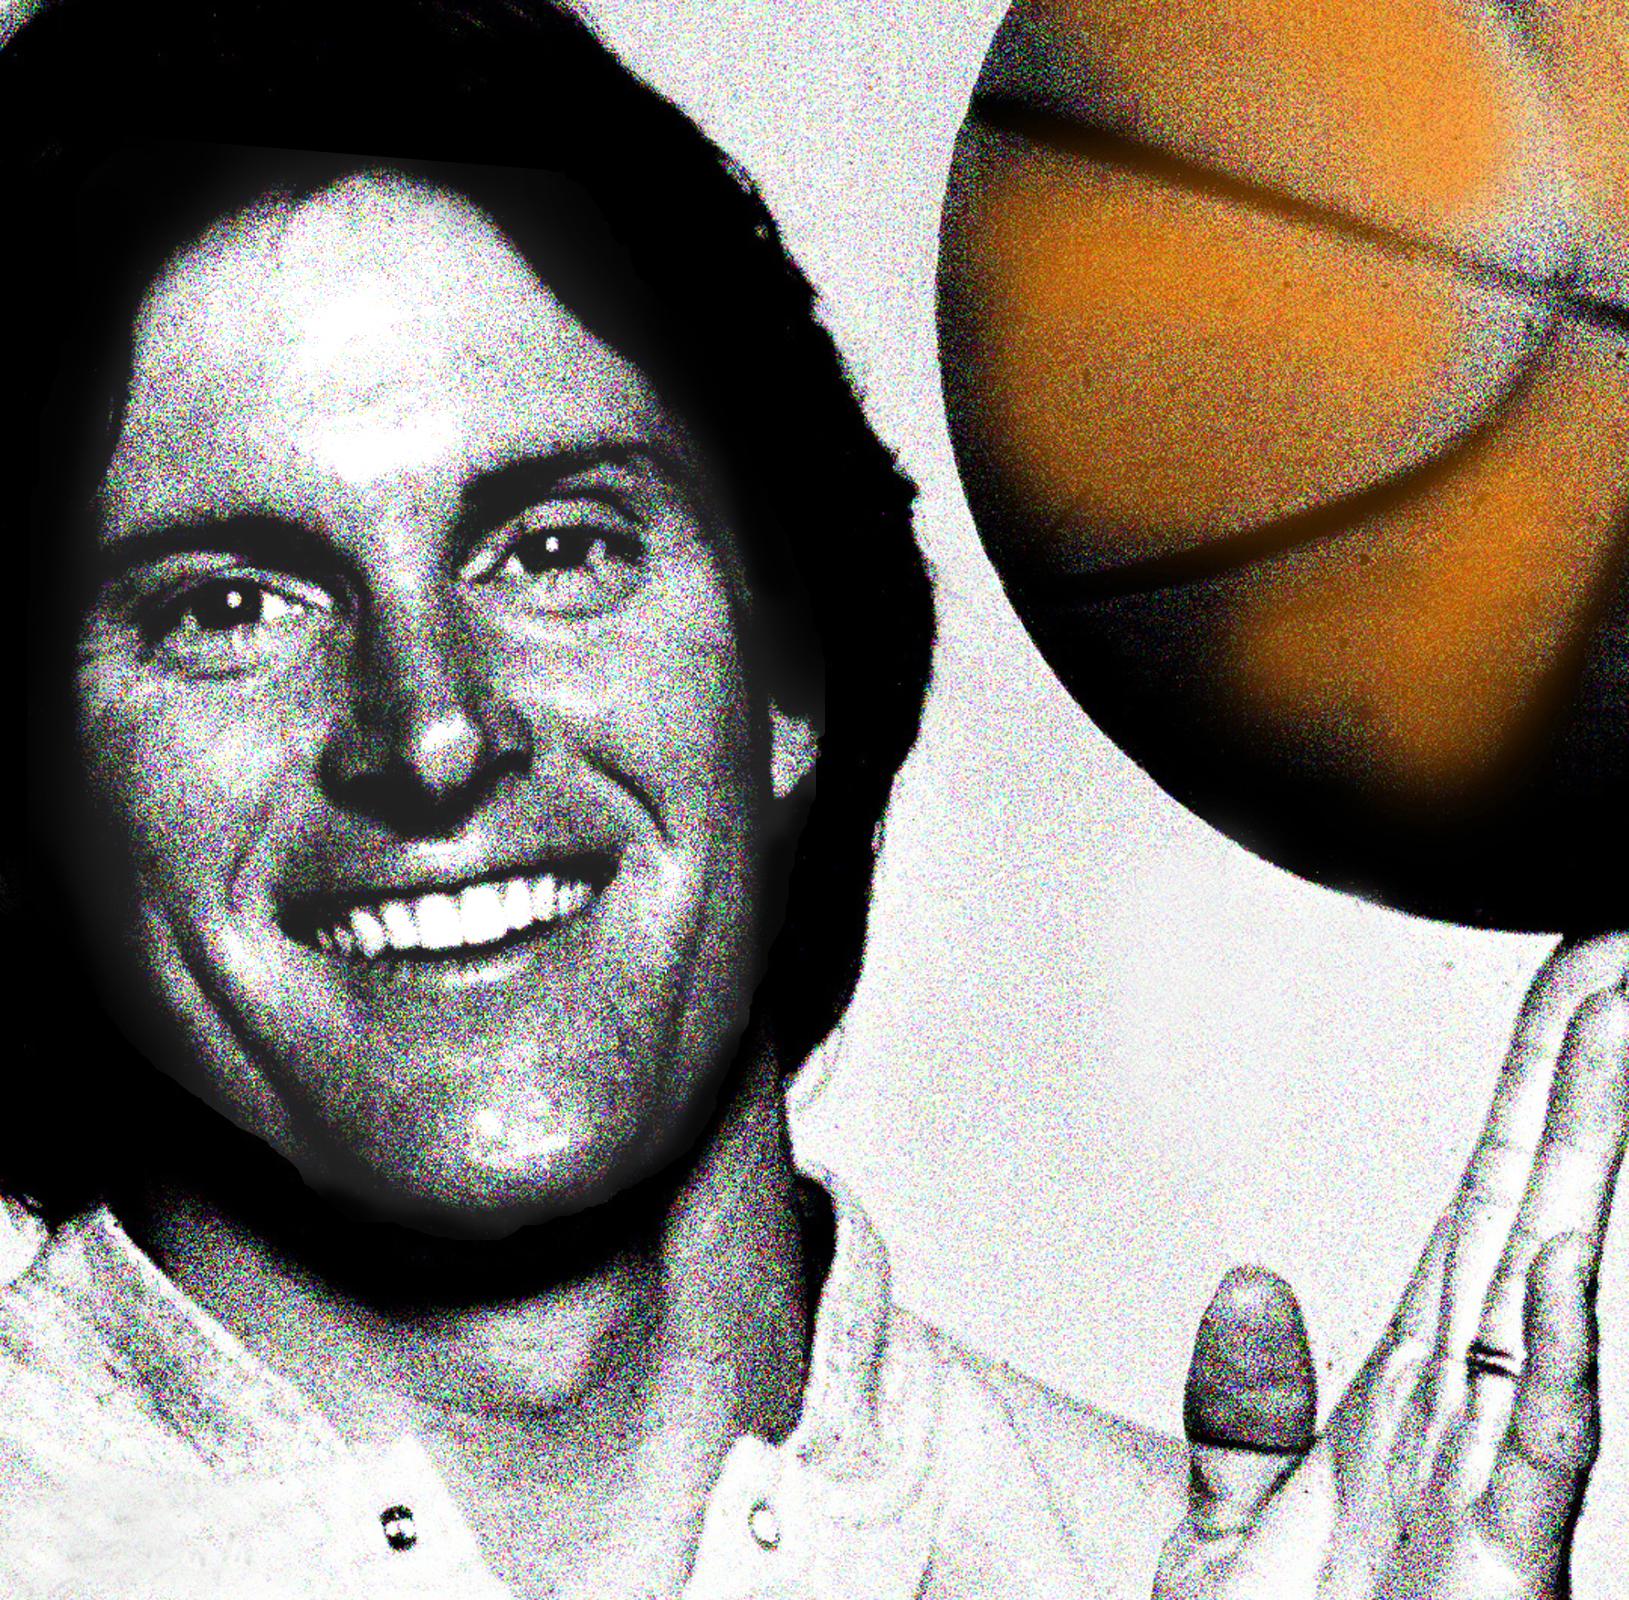 Gary Bernstein Portrait Photograph - Bruce Jenner with Basketball 1 (this is a large canvas; see smaller sizes below)